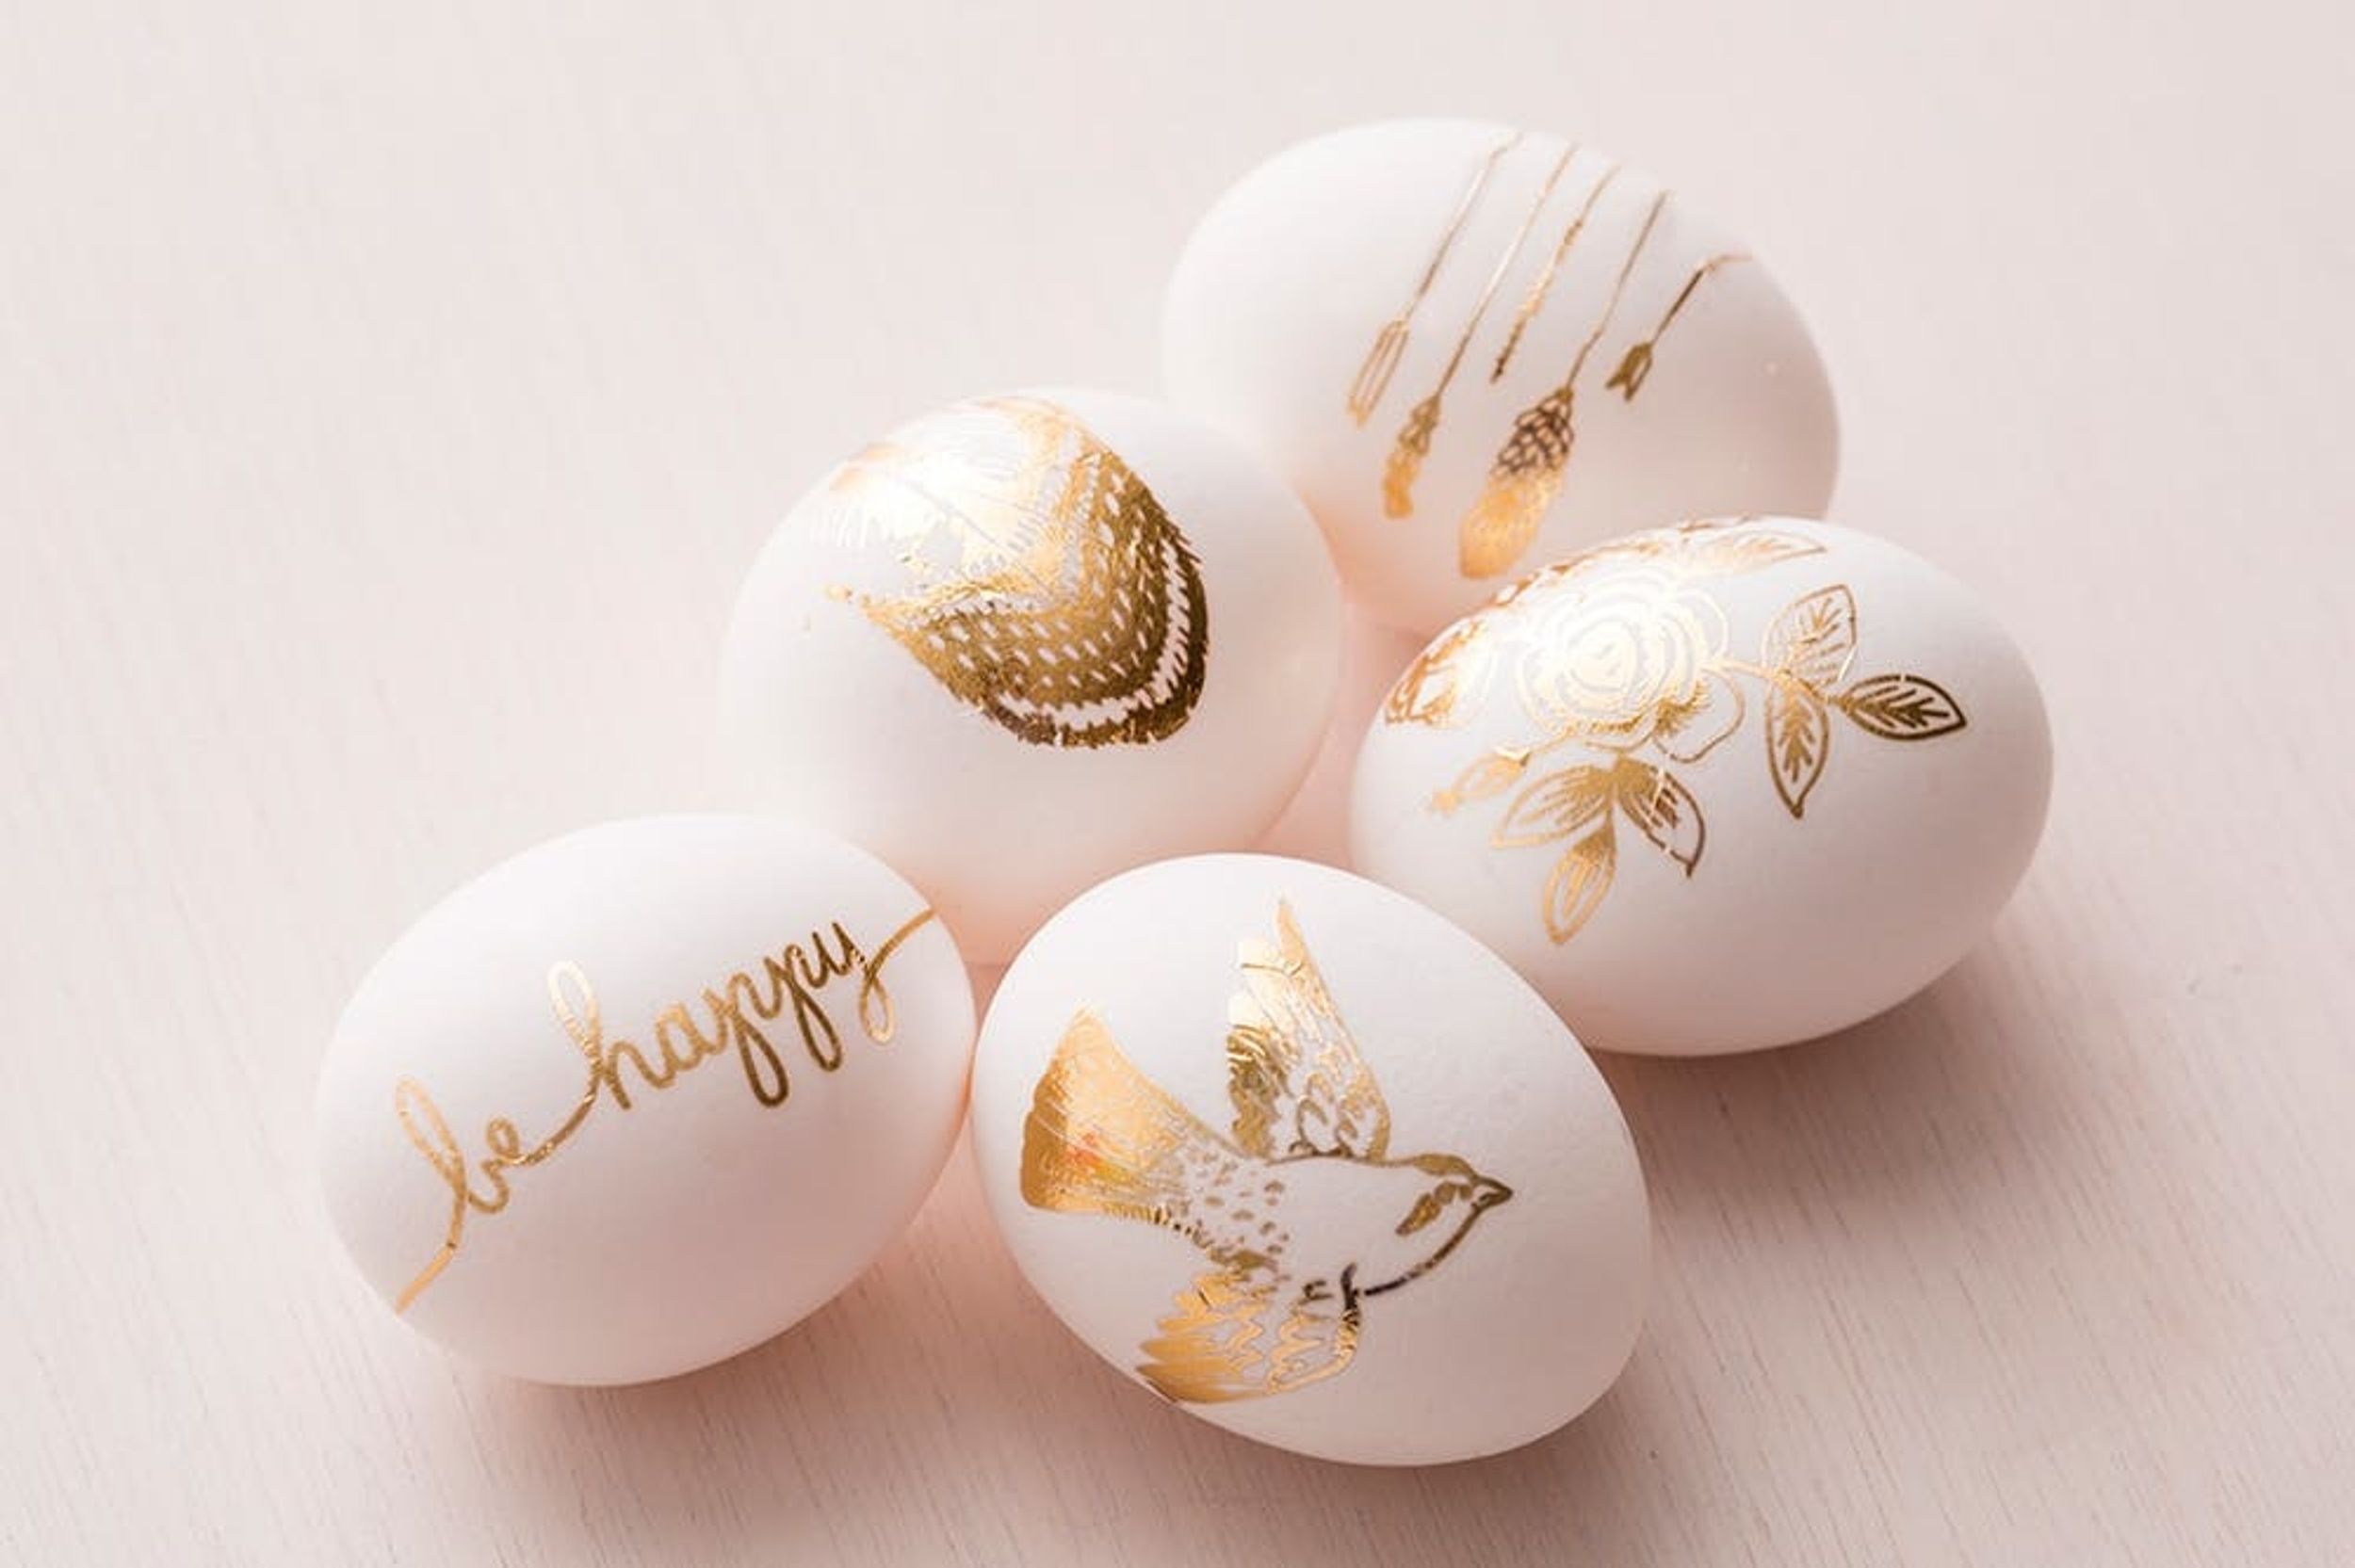 Easy Easter Egg Decorating That Don’t Use Dye